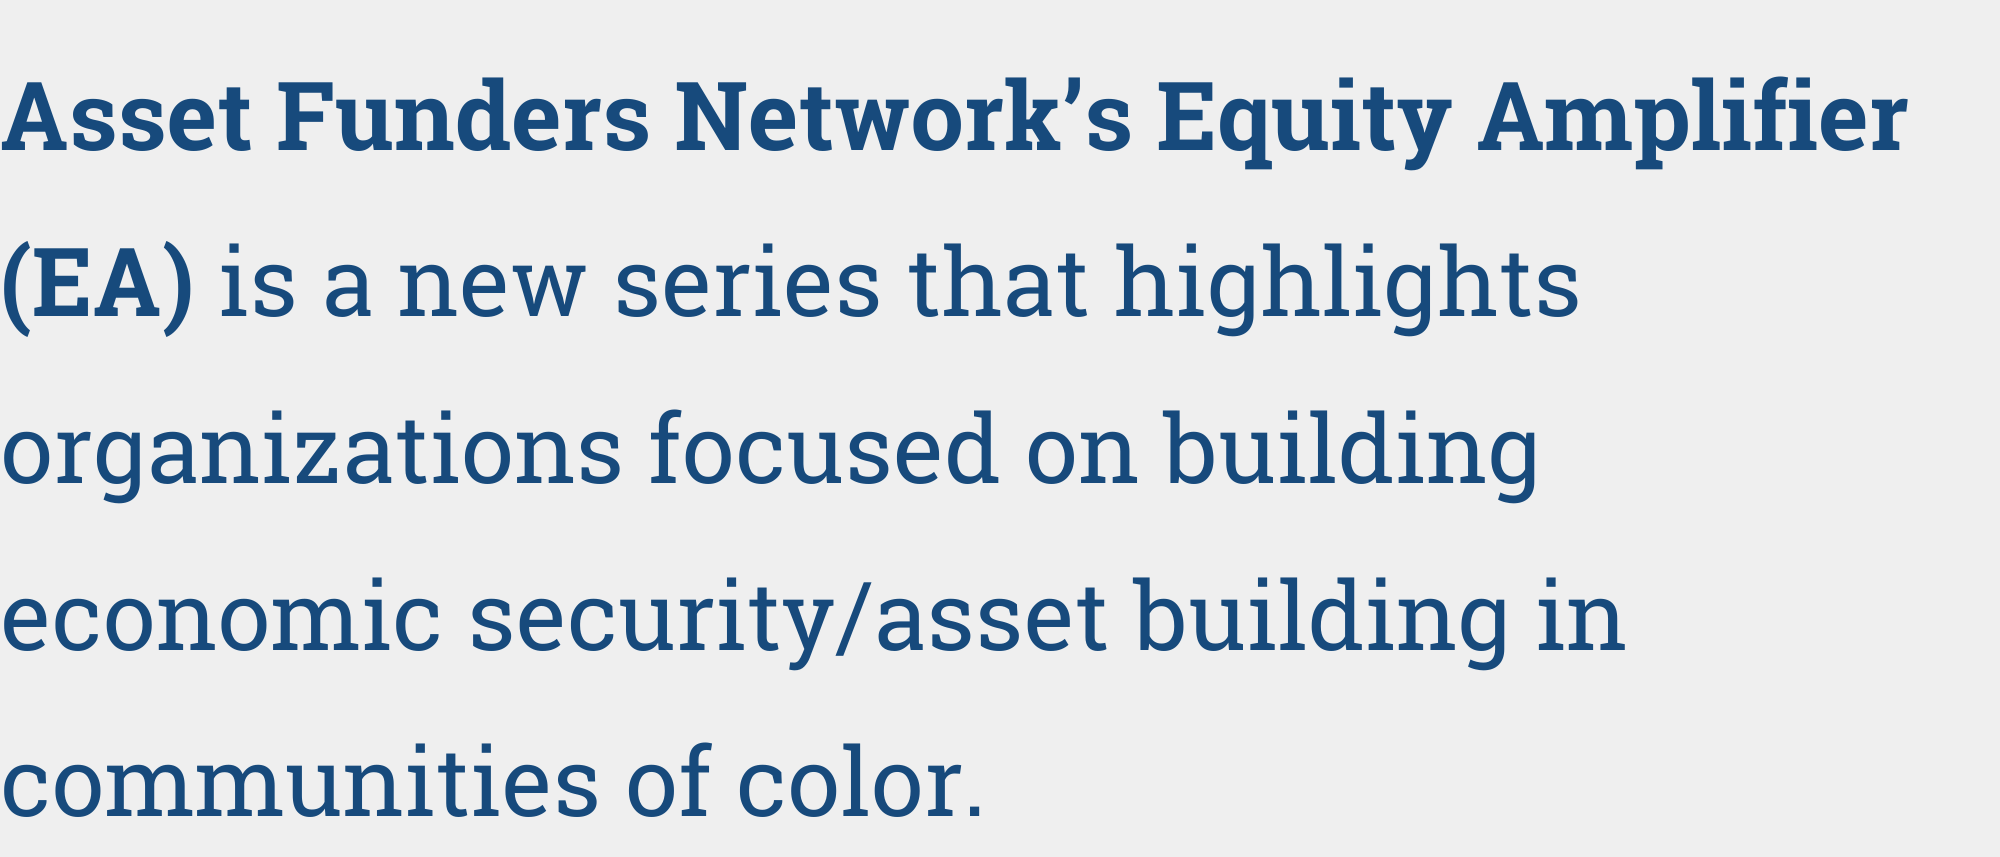 Equity Amplifier is a new series that highlights organizations focused on building economic security/asset building in communities of color